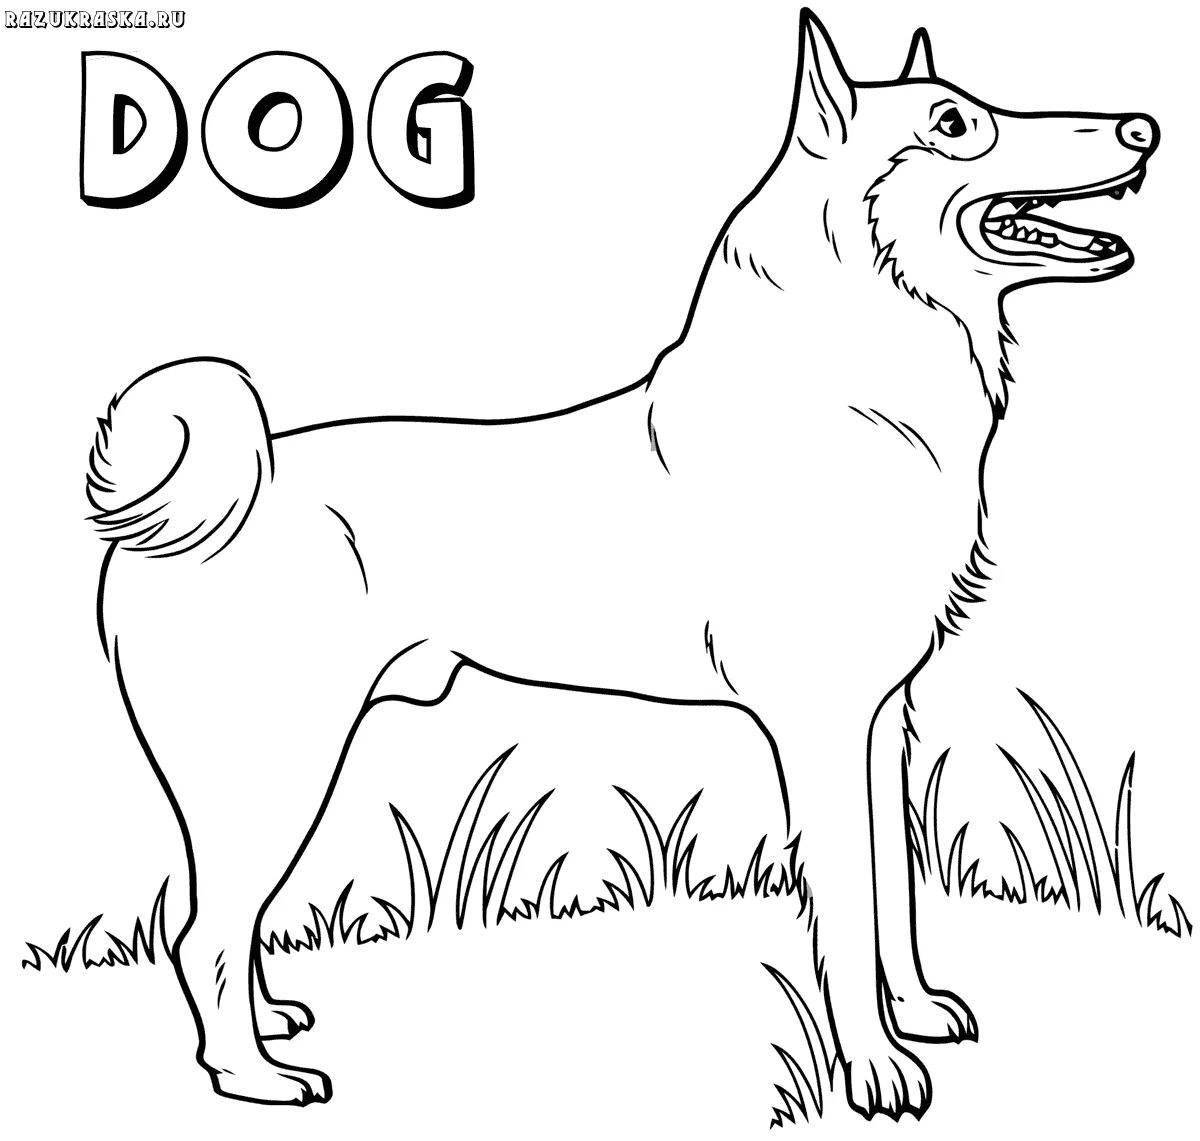 Fabulous service dogs coloring book for kids